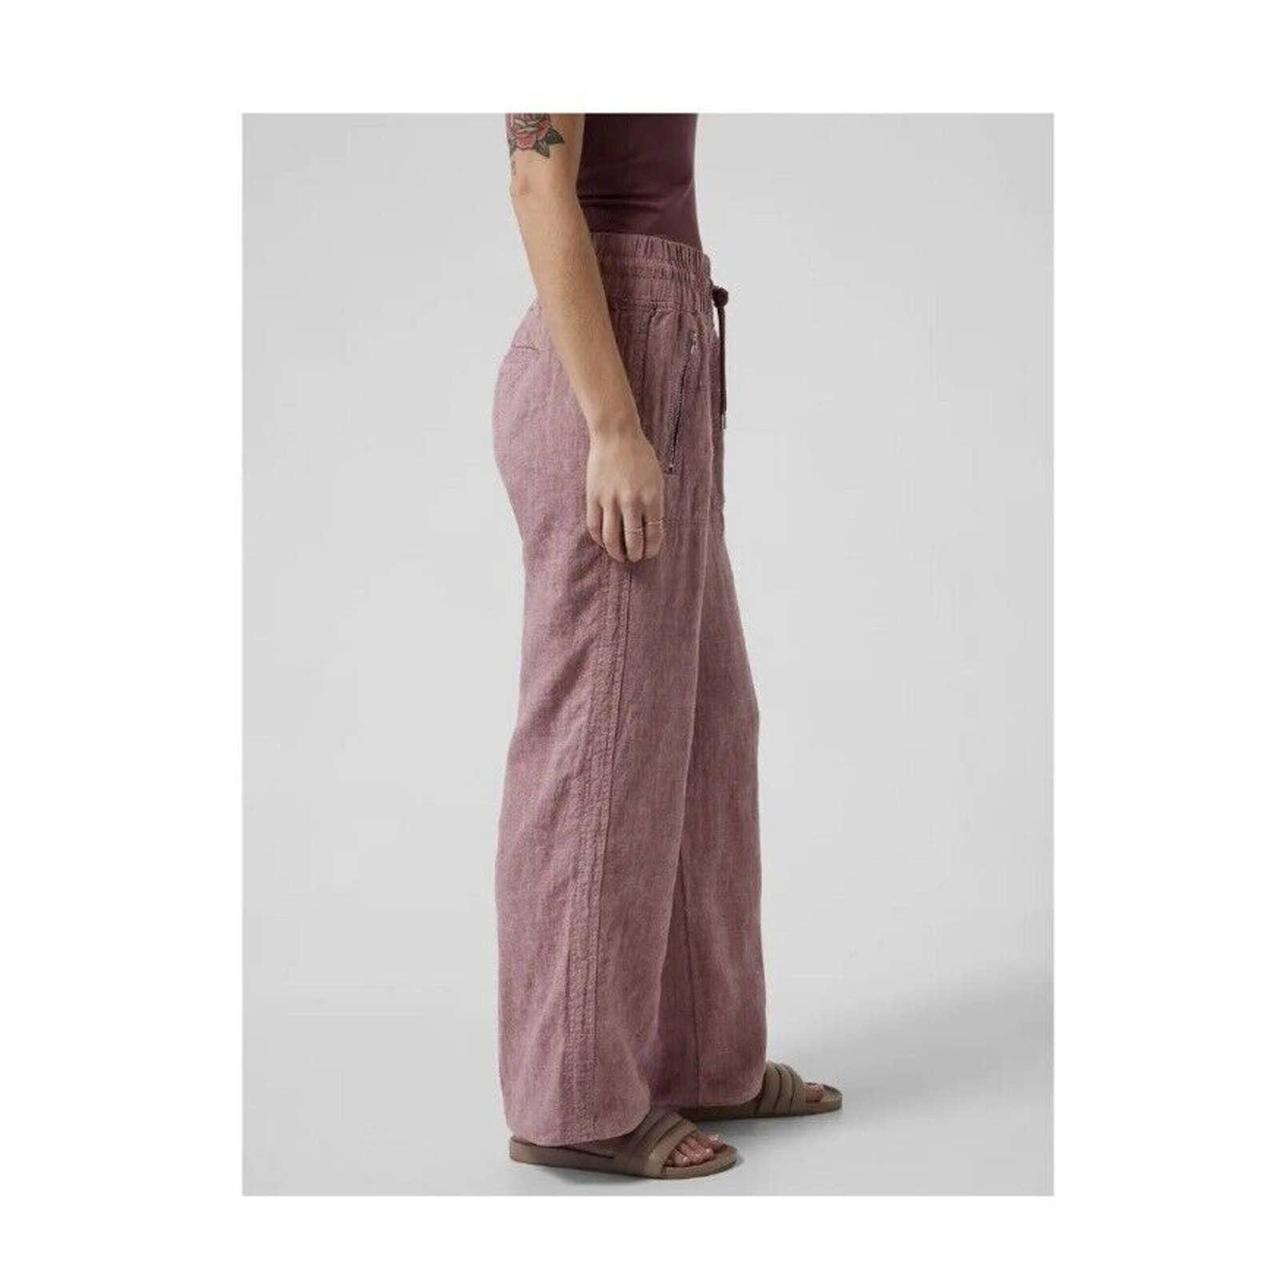 Athleta Cabo Linen Wide Leg Pants New with - Depop